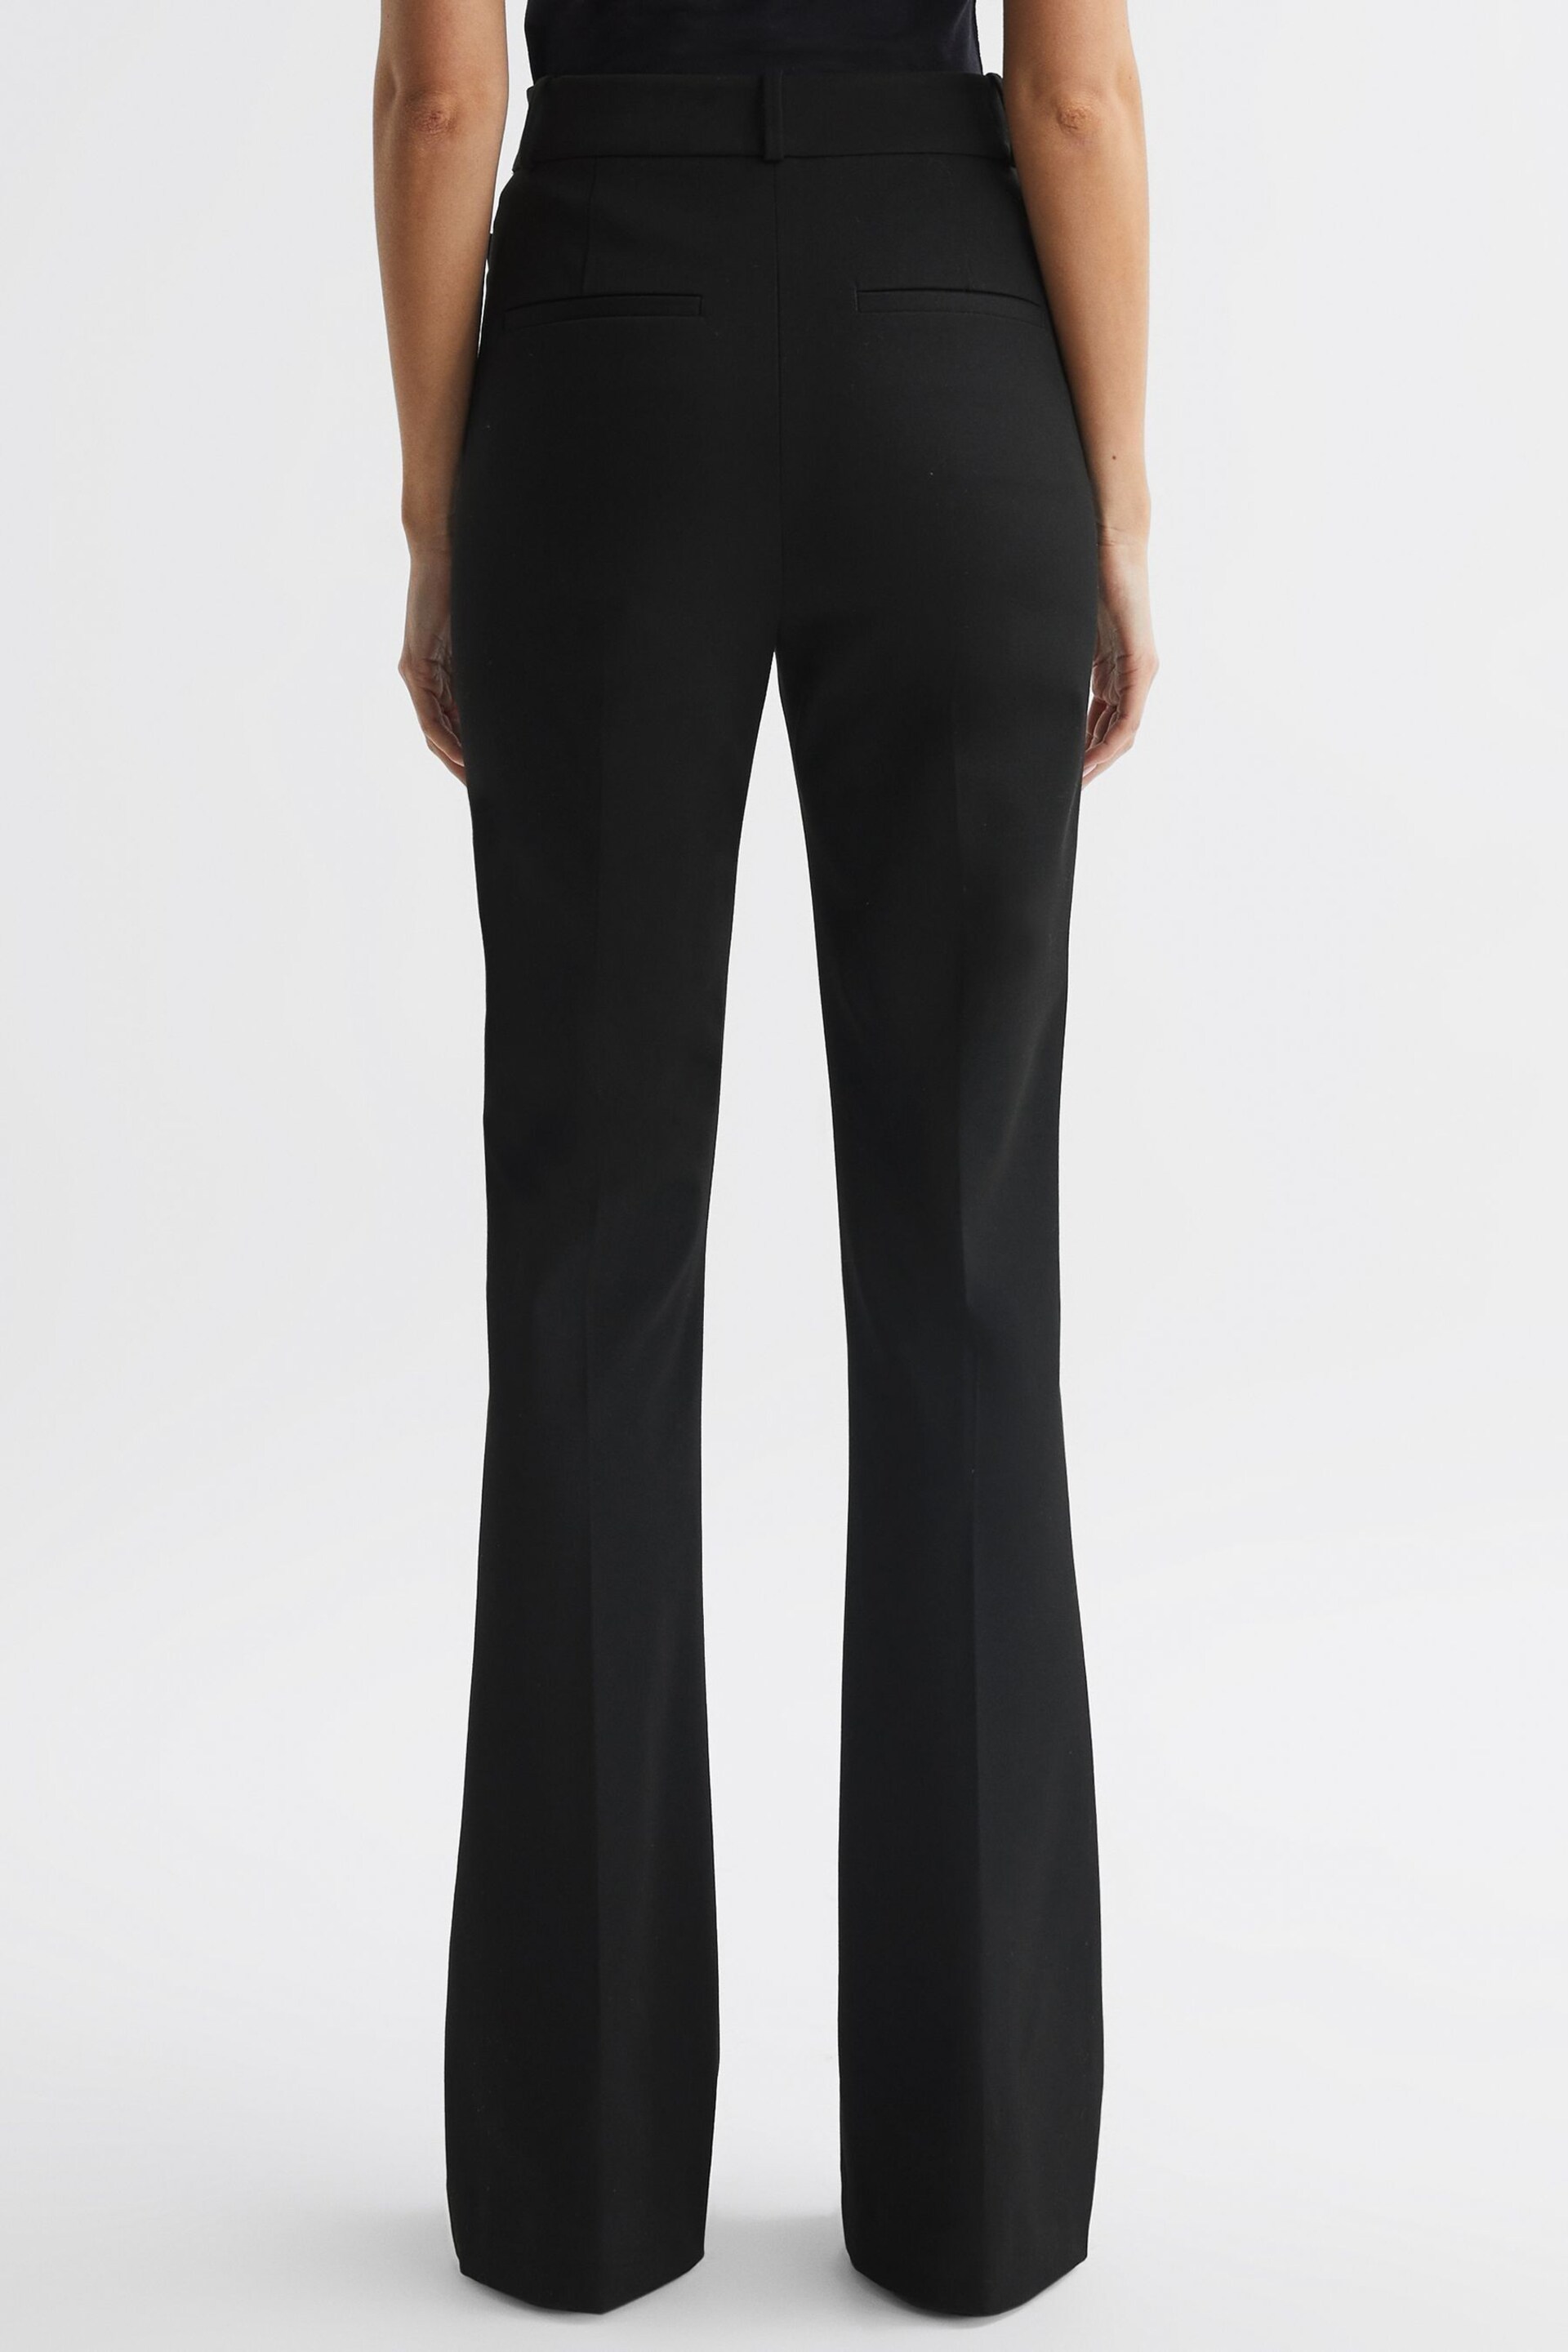 Reiss Black Dylan Petite Flared High Rise Trousers - Image 5 of 6